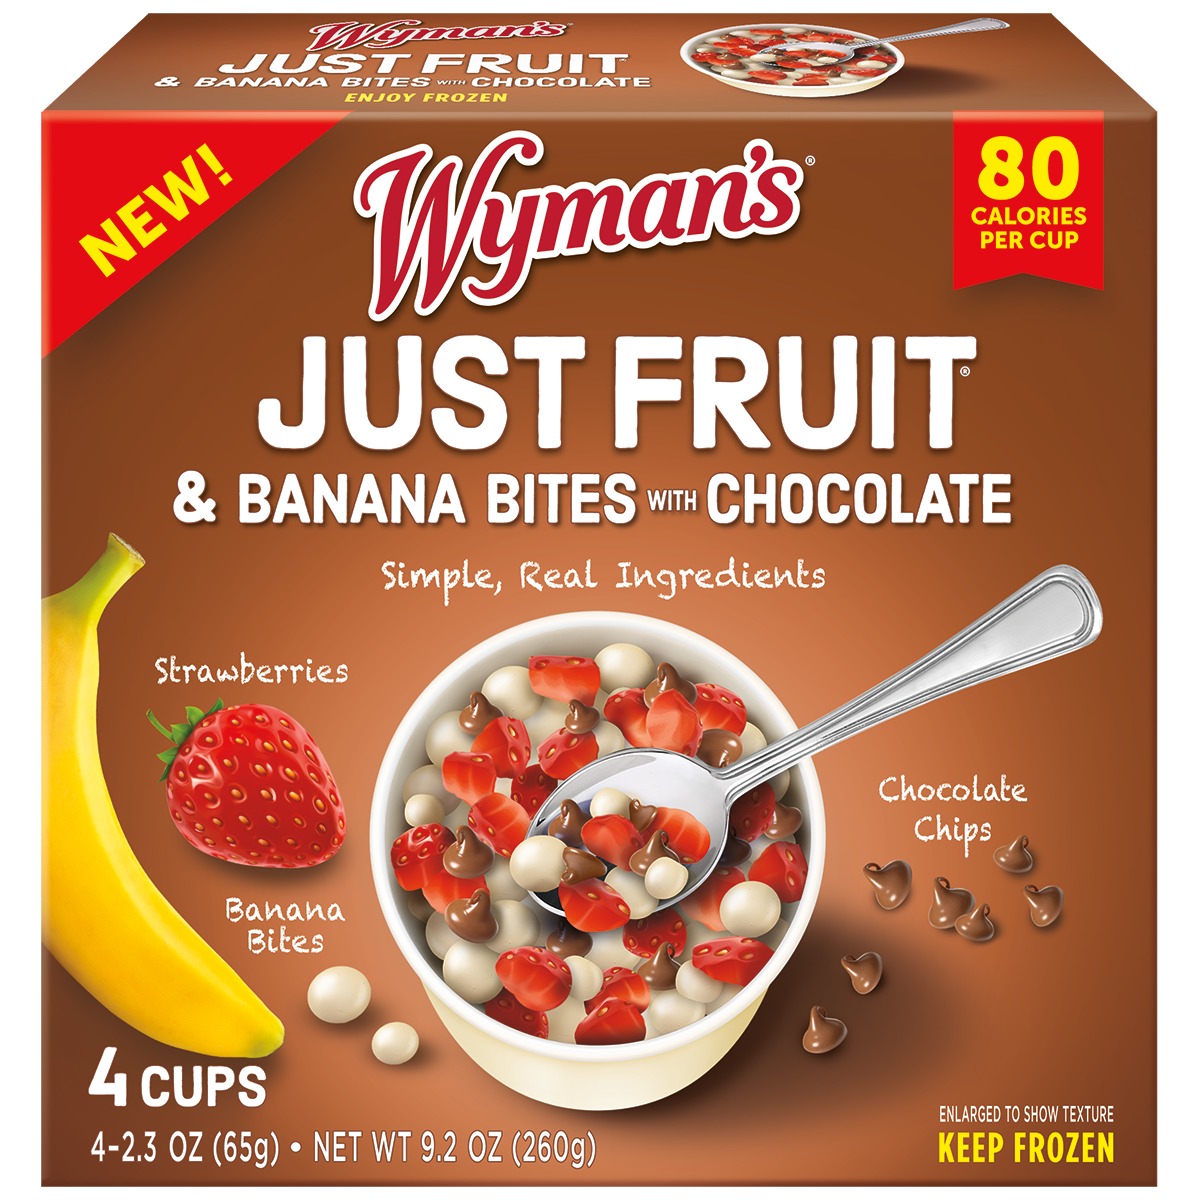 A box of Shop Wyman's Just Fruit - Banana Bites with Chocolate.